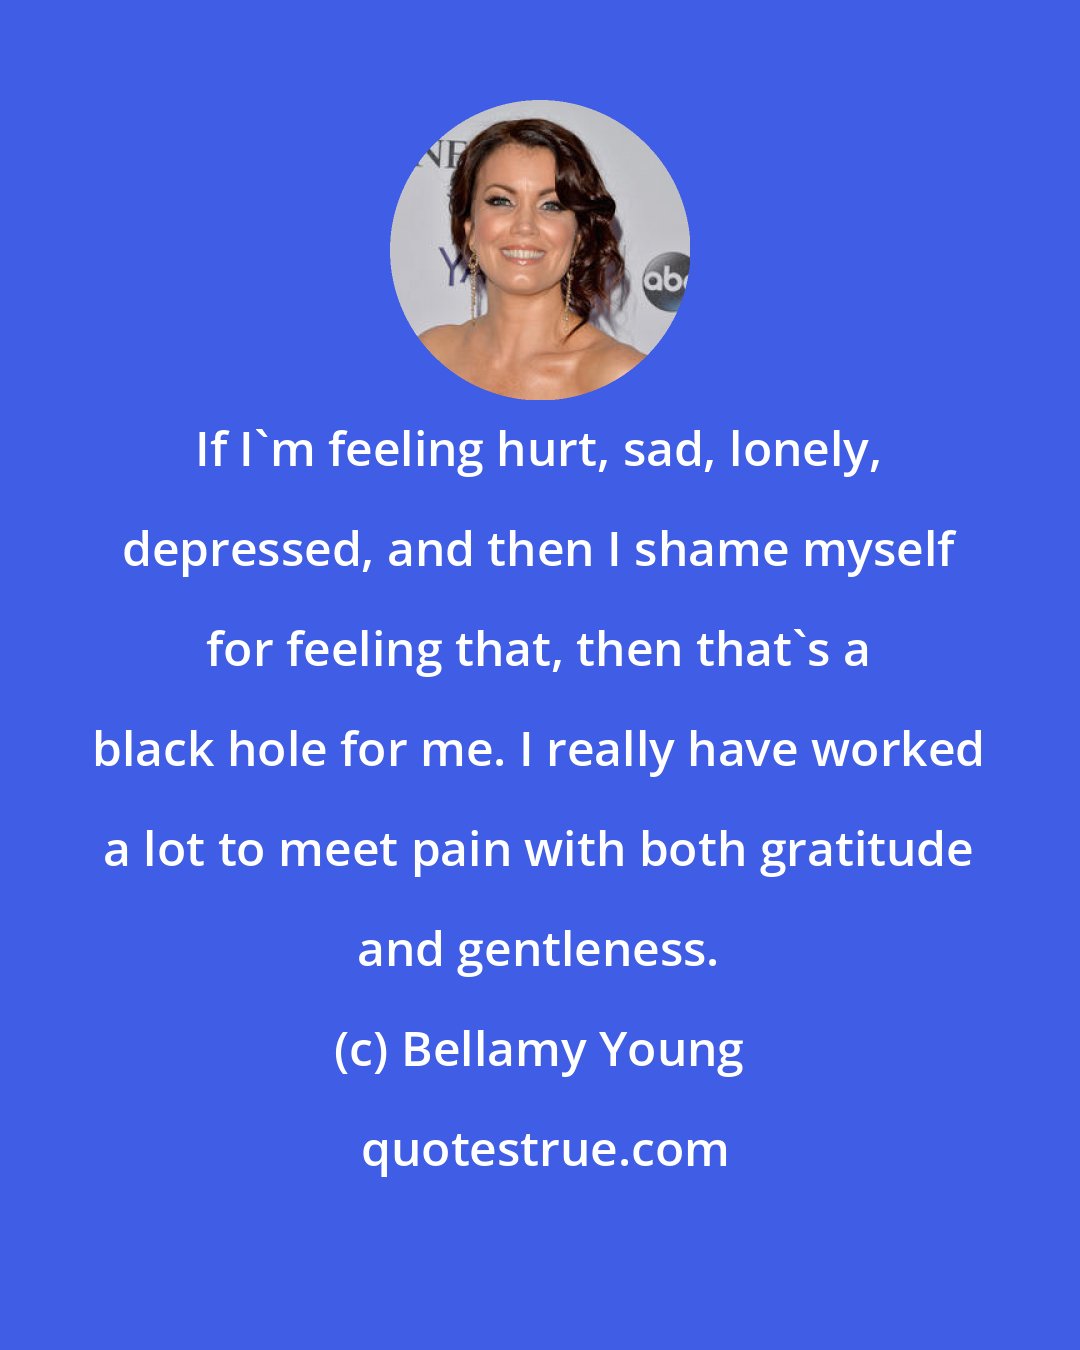 Bellamy Young: If I'm feeling hurt, sad, lonely, depressed, and then I shame myself for feeling that, then that's a black hole for me. I really have worked a lot to meet pain with both gratitude and gentleness.